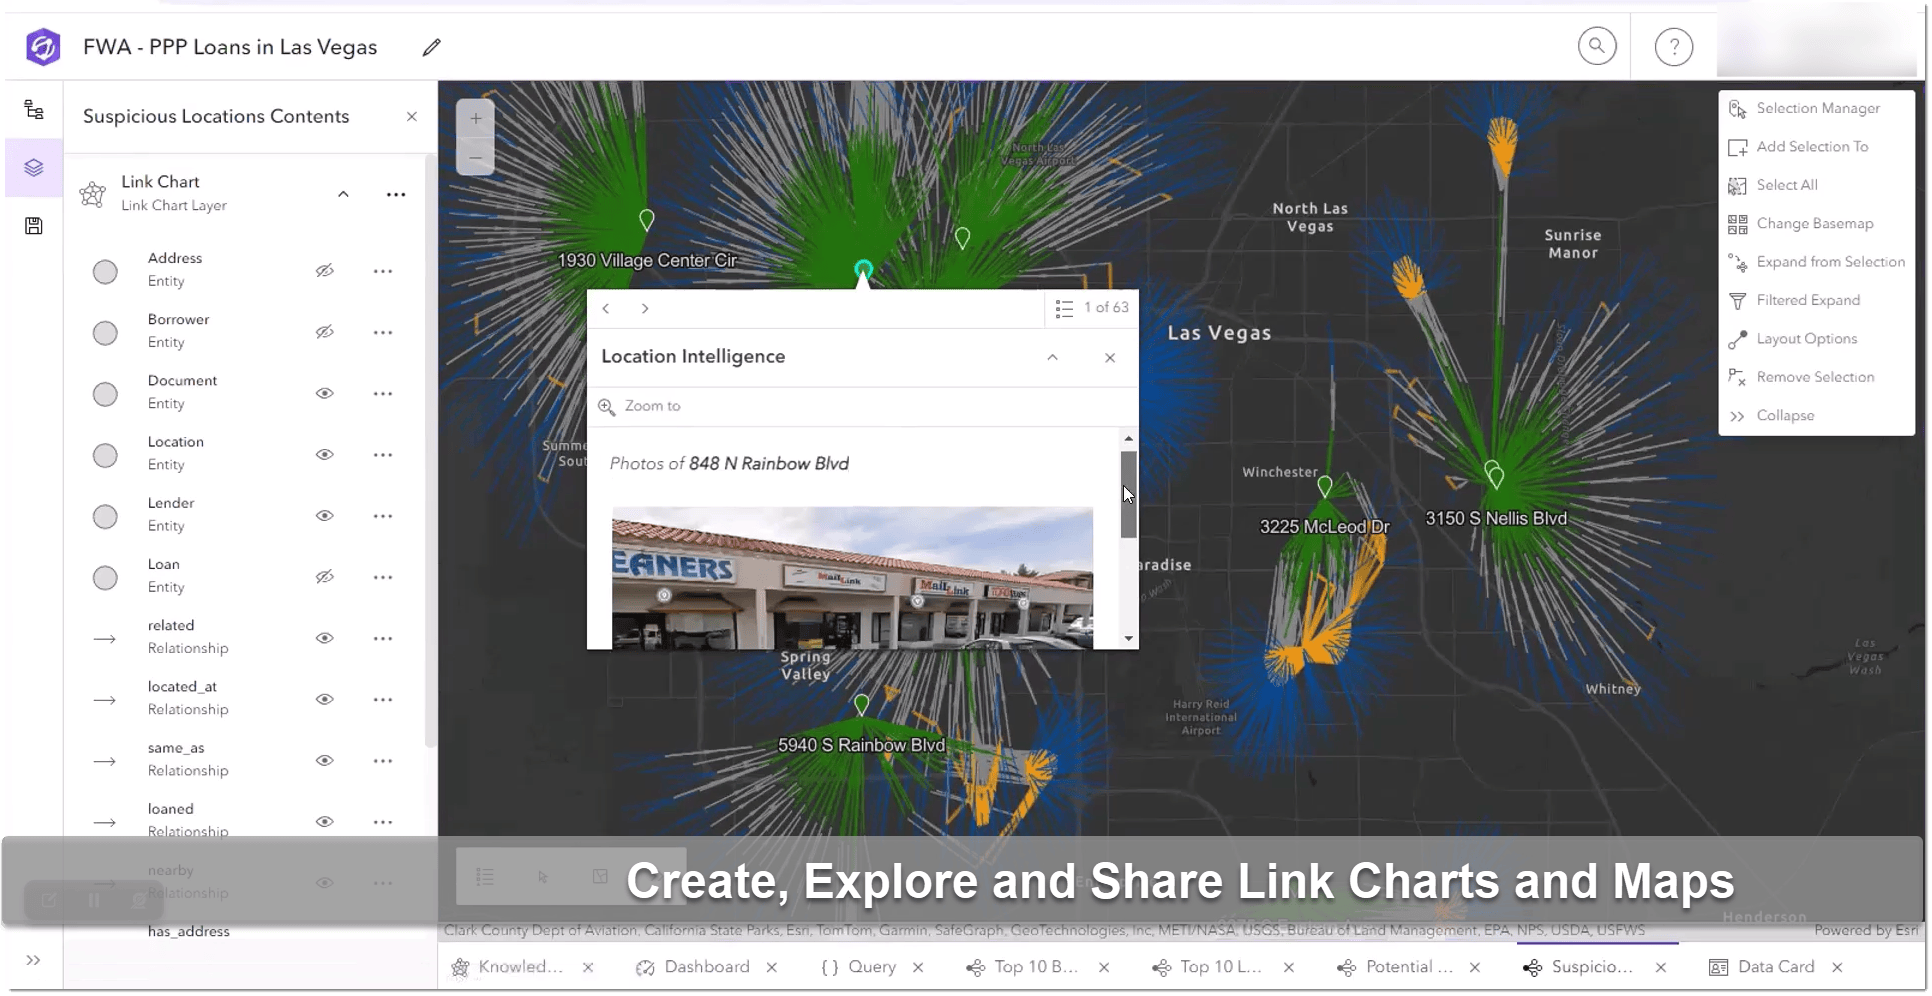 Create new link charts, maps or data cards with custom symbology imported from views shared from ArcGIS desktop.